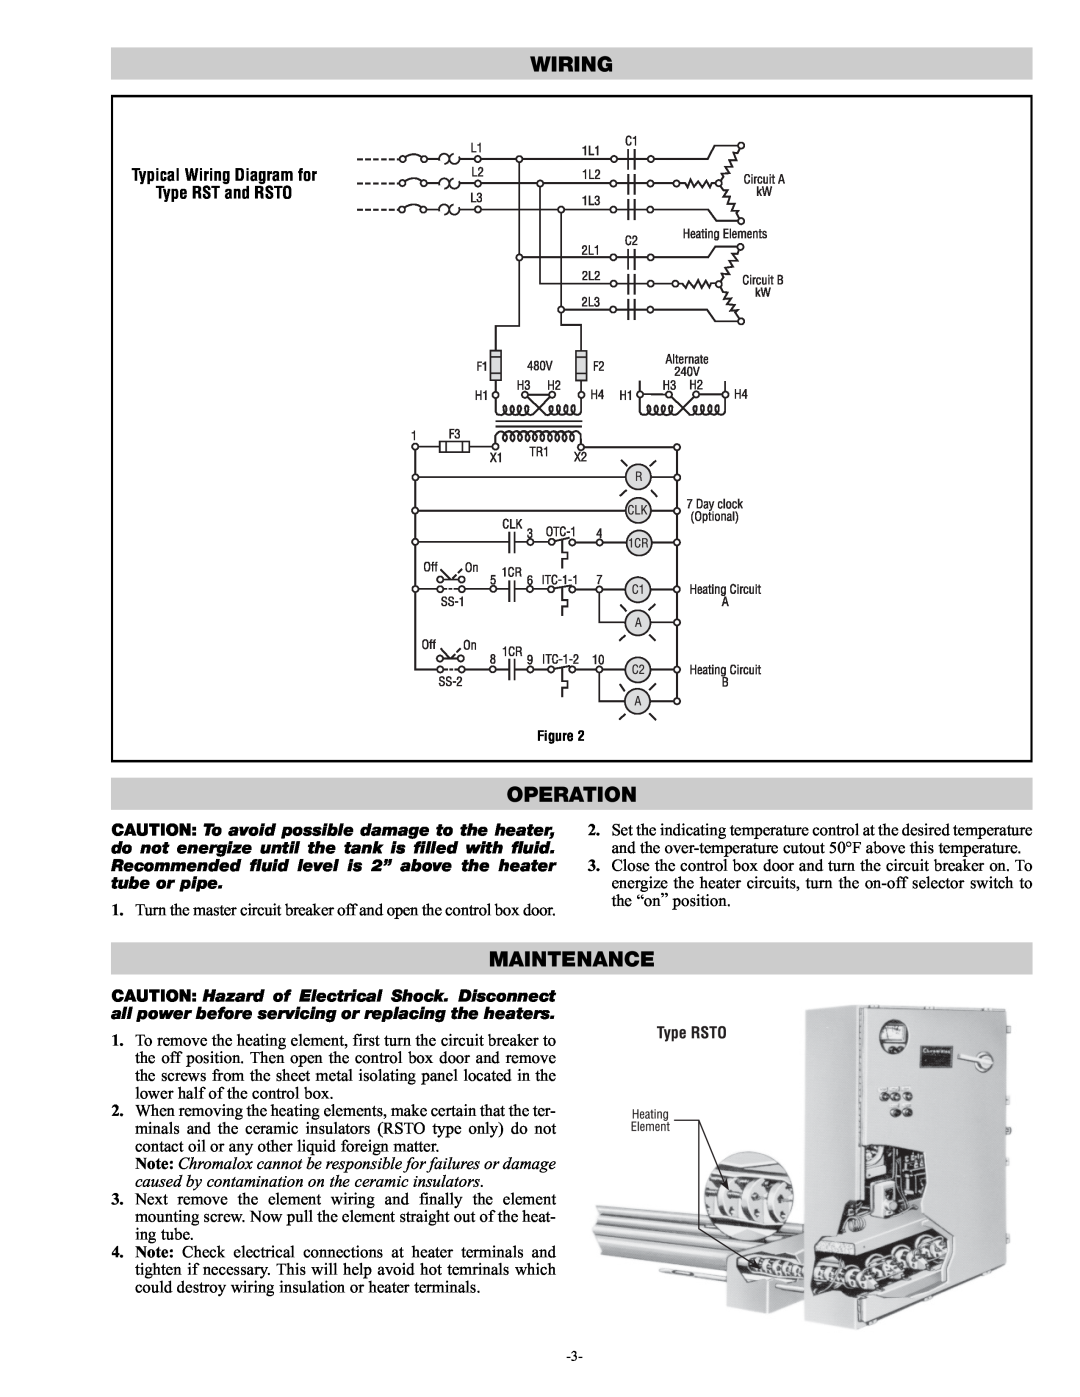 Chromalox PN400-3 specifications Operation, Maintenance, Typical Wiring Diagram for Type RST and RSTO 